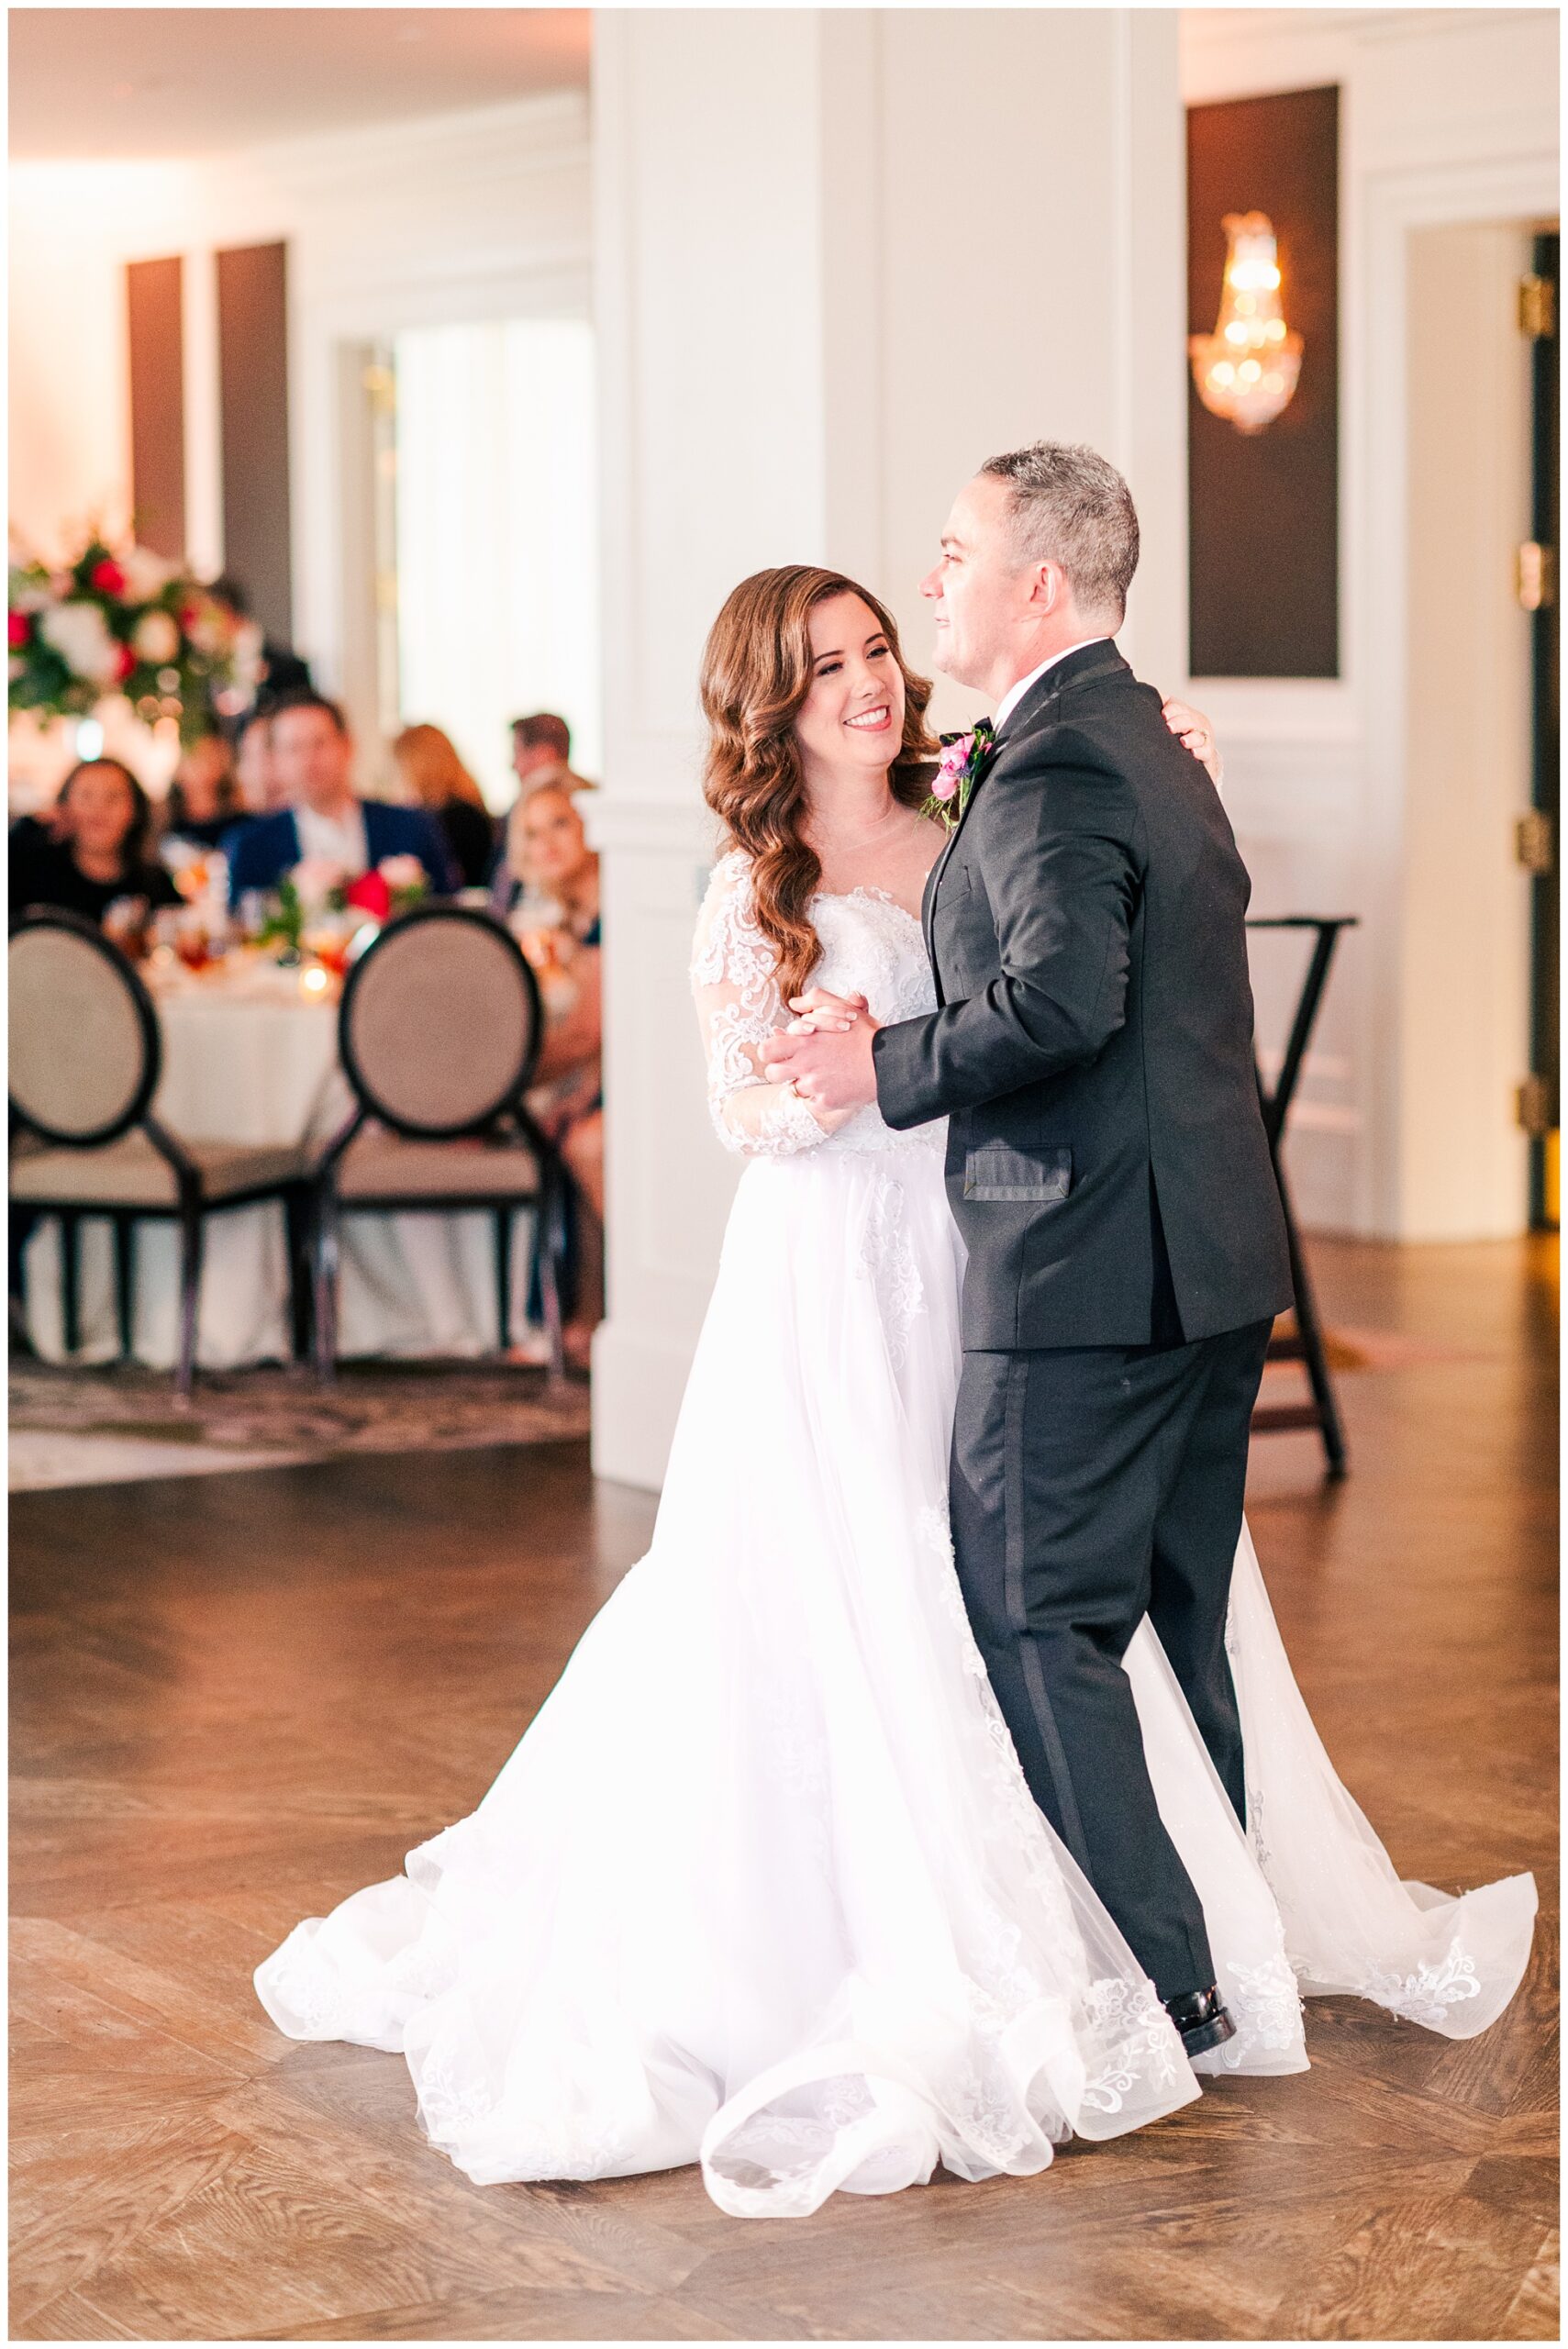 Bride and Groom share first dance at the Houston Petroleum Club.